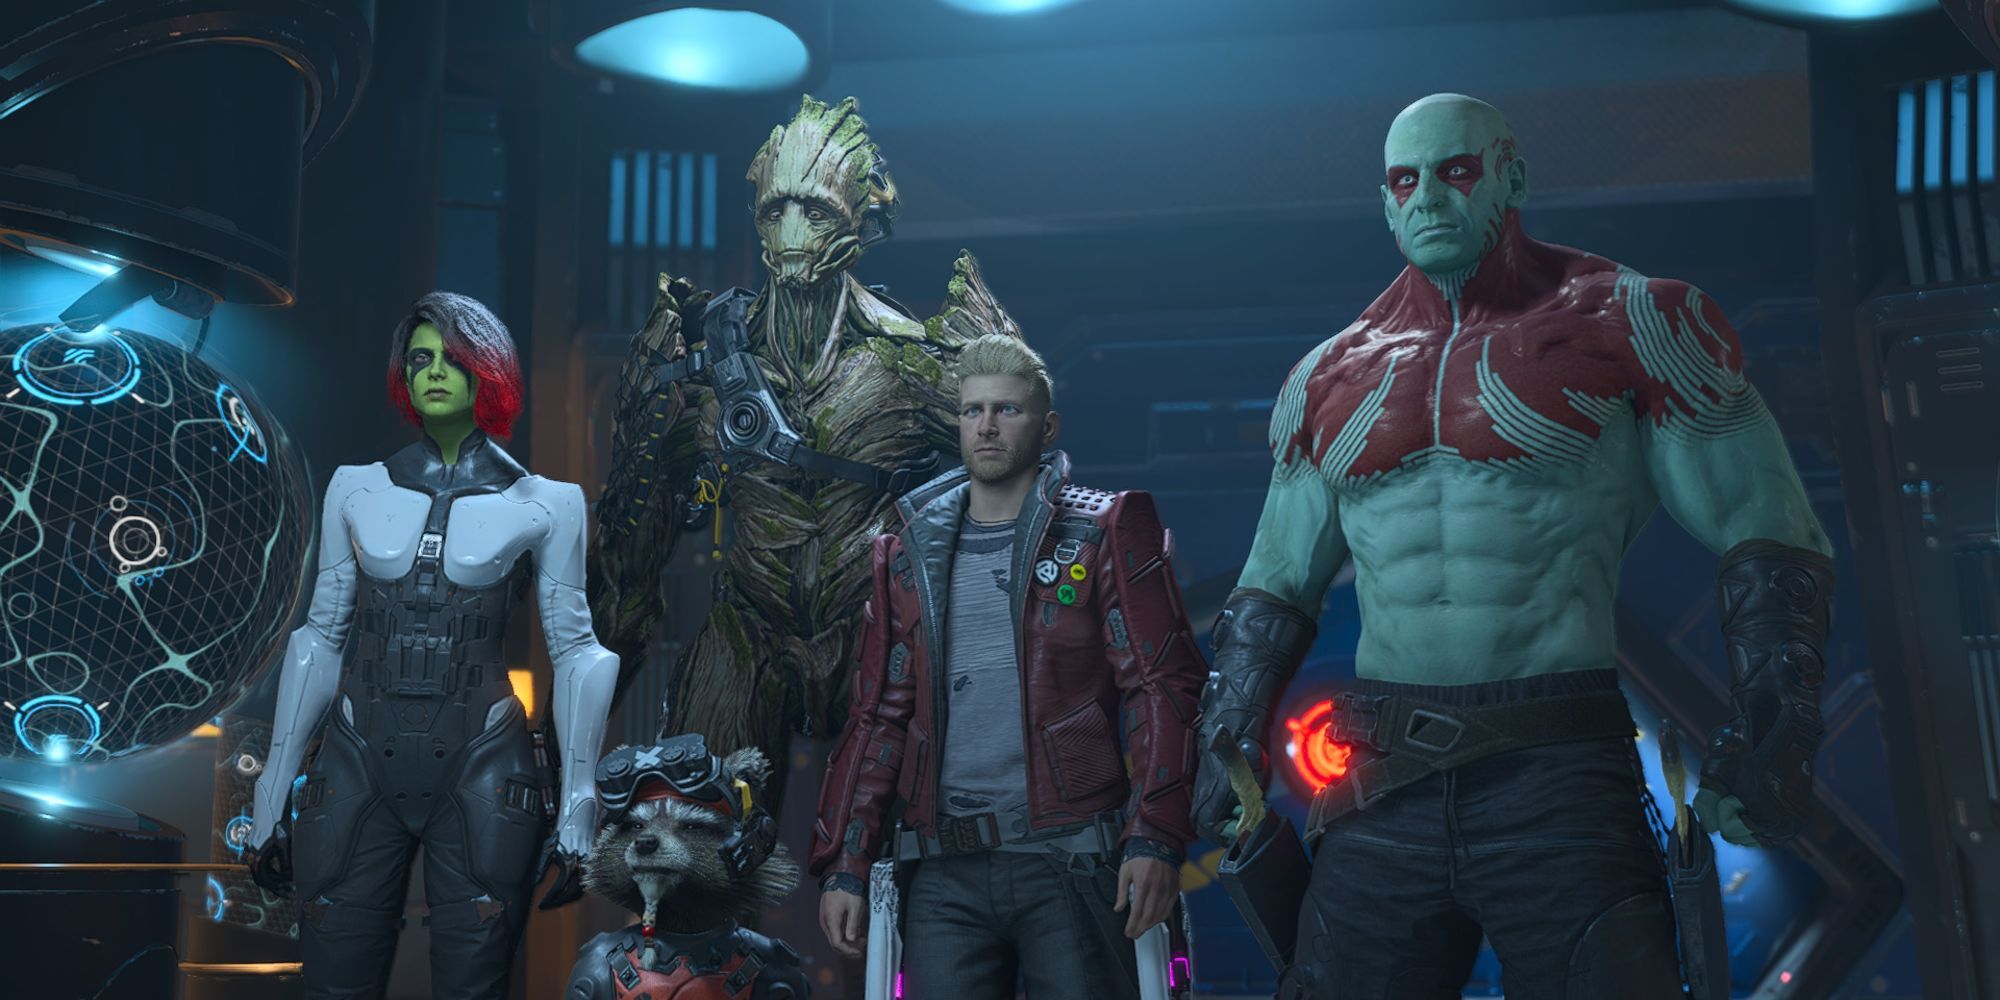 image from the game Marvel's Guardians of the Galaxy featuring Star-Lord, Drax, Groot, Gamora